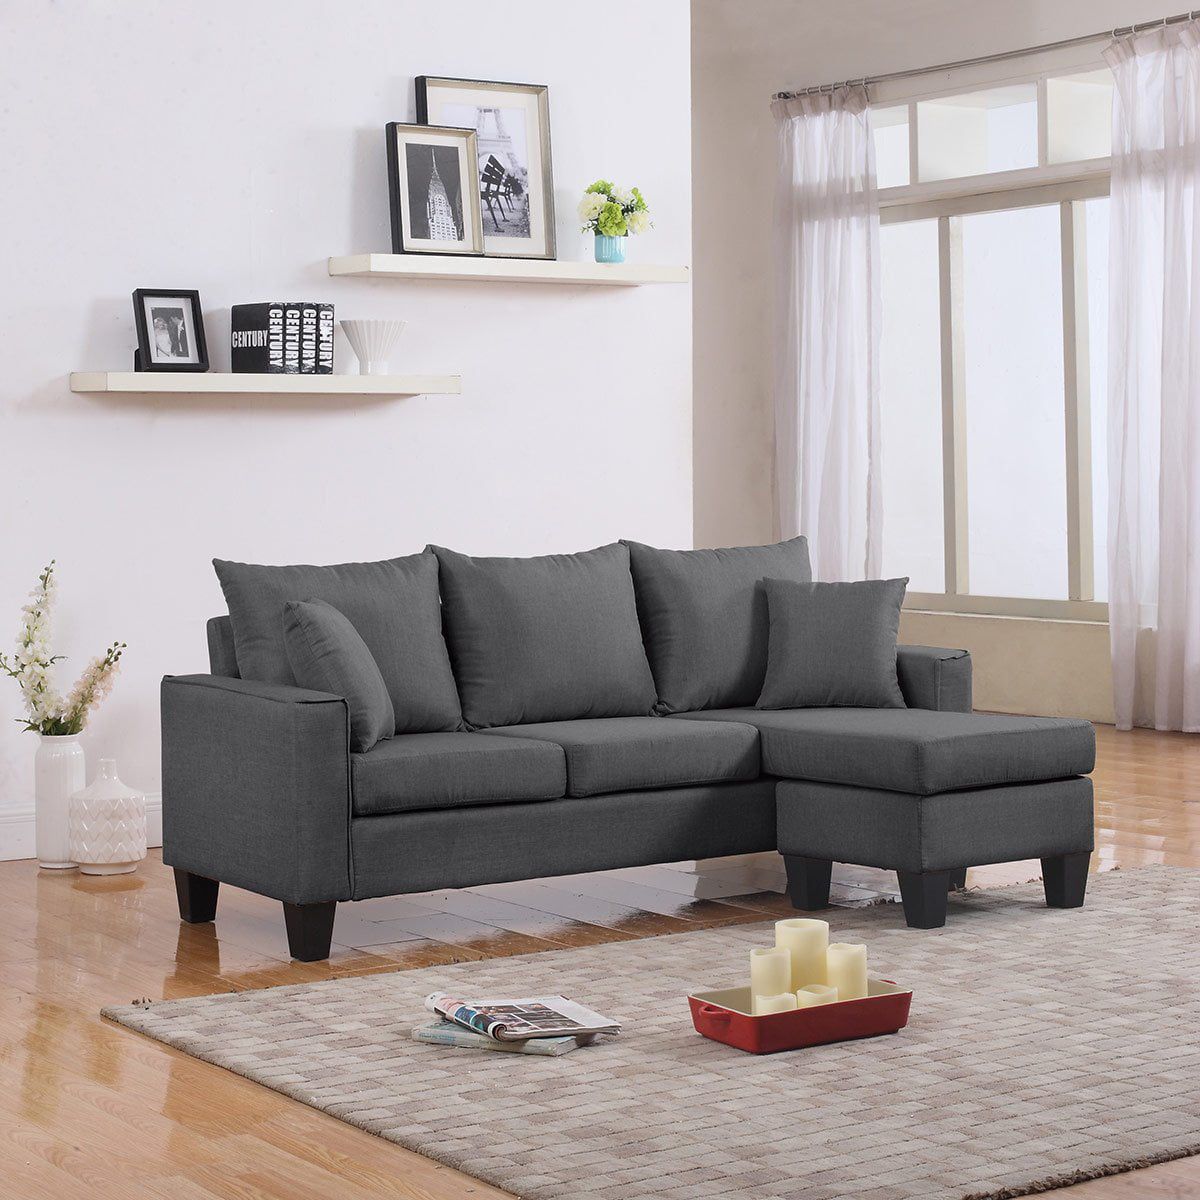 Modern Linen Fabric Small Space Sectional Sofa With Reversible Chaise Intended For Modern Light Grey Loveseat Sofas (Gallery 20 of 20)